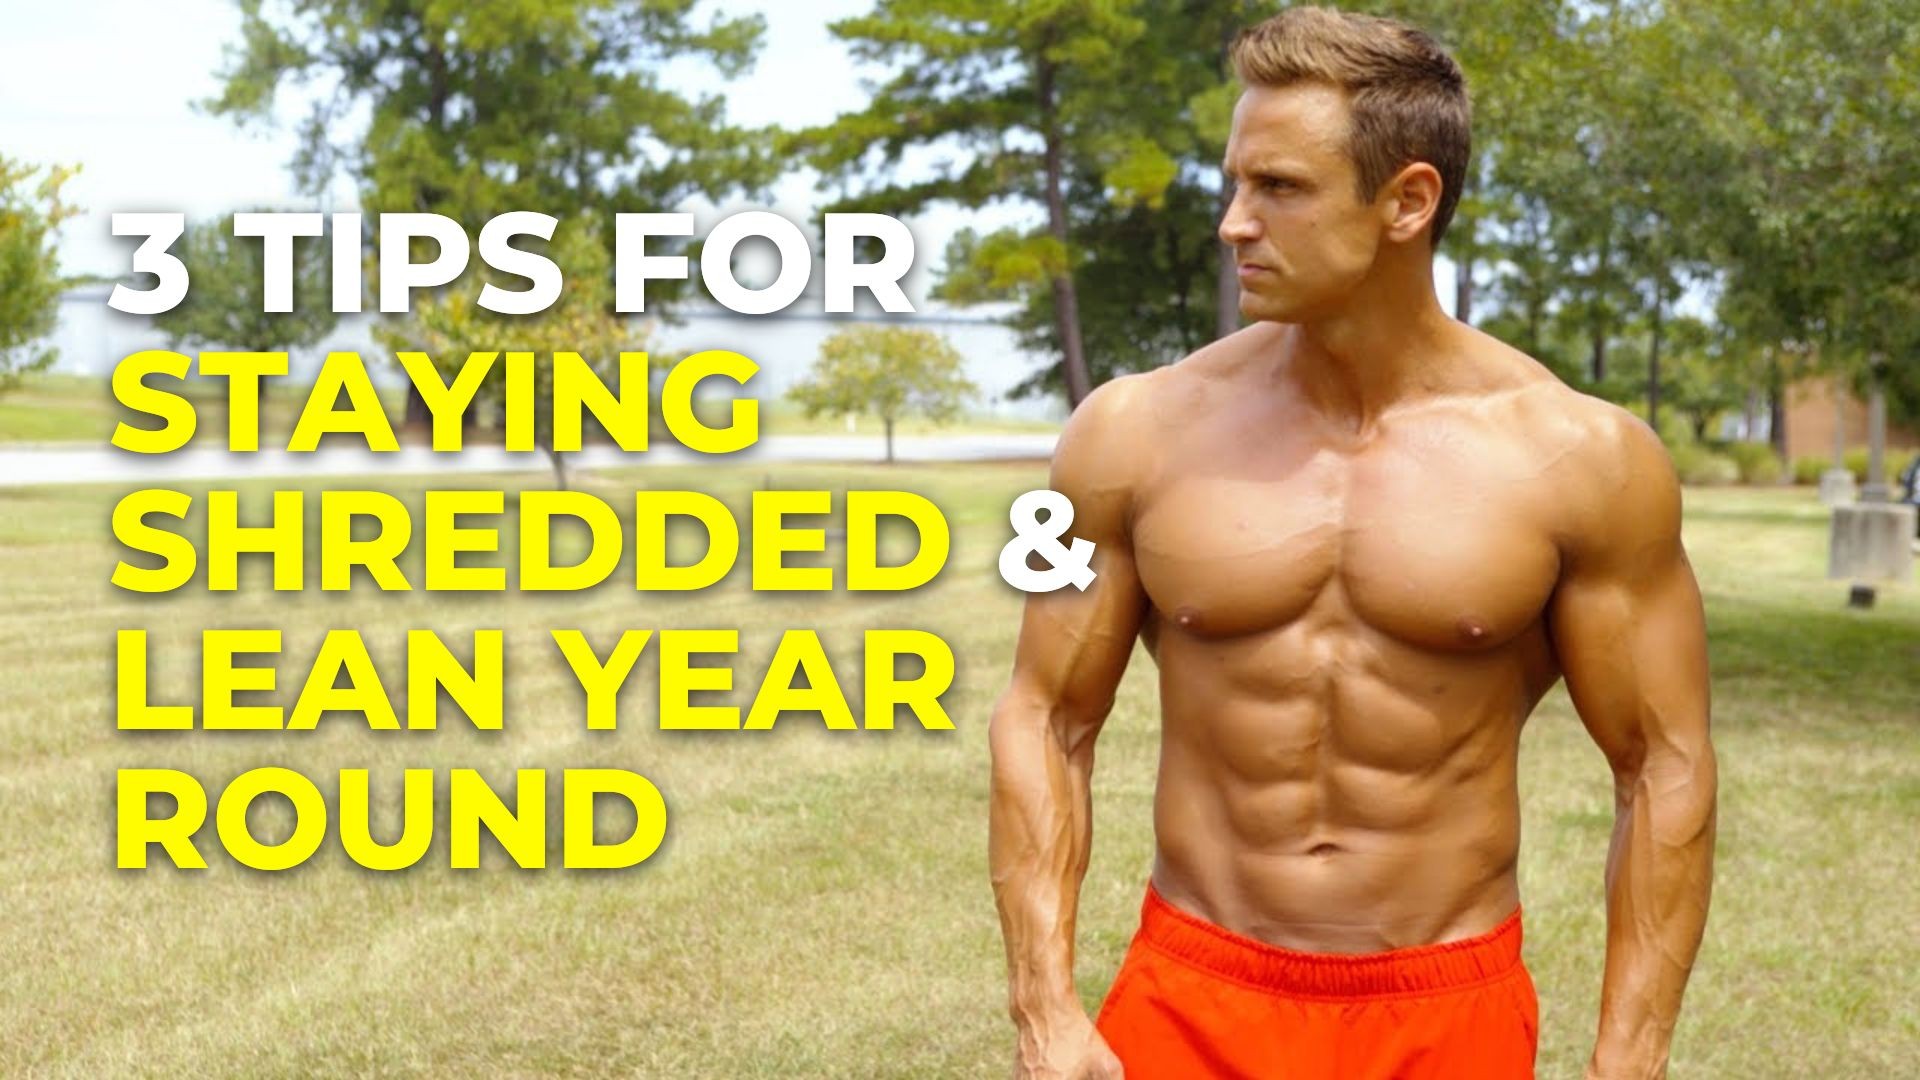 3 Tips For Staying Shredded & Lean Year-Round w/ David Morin